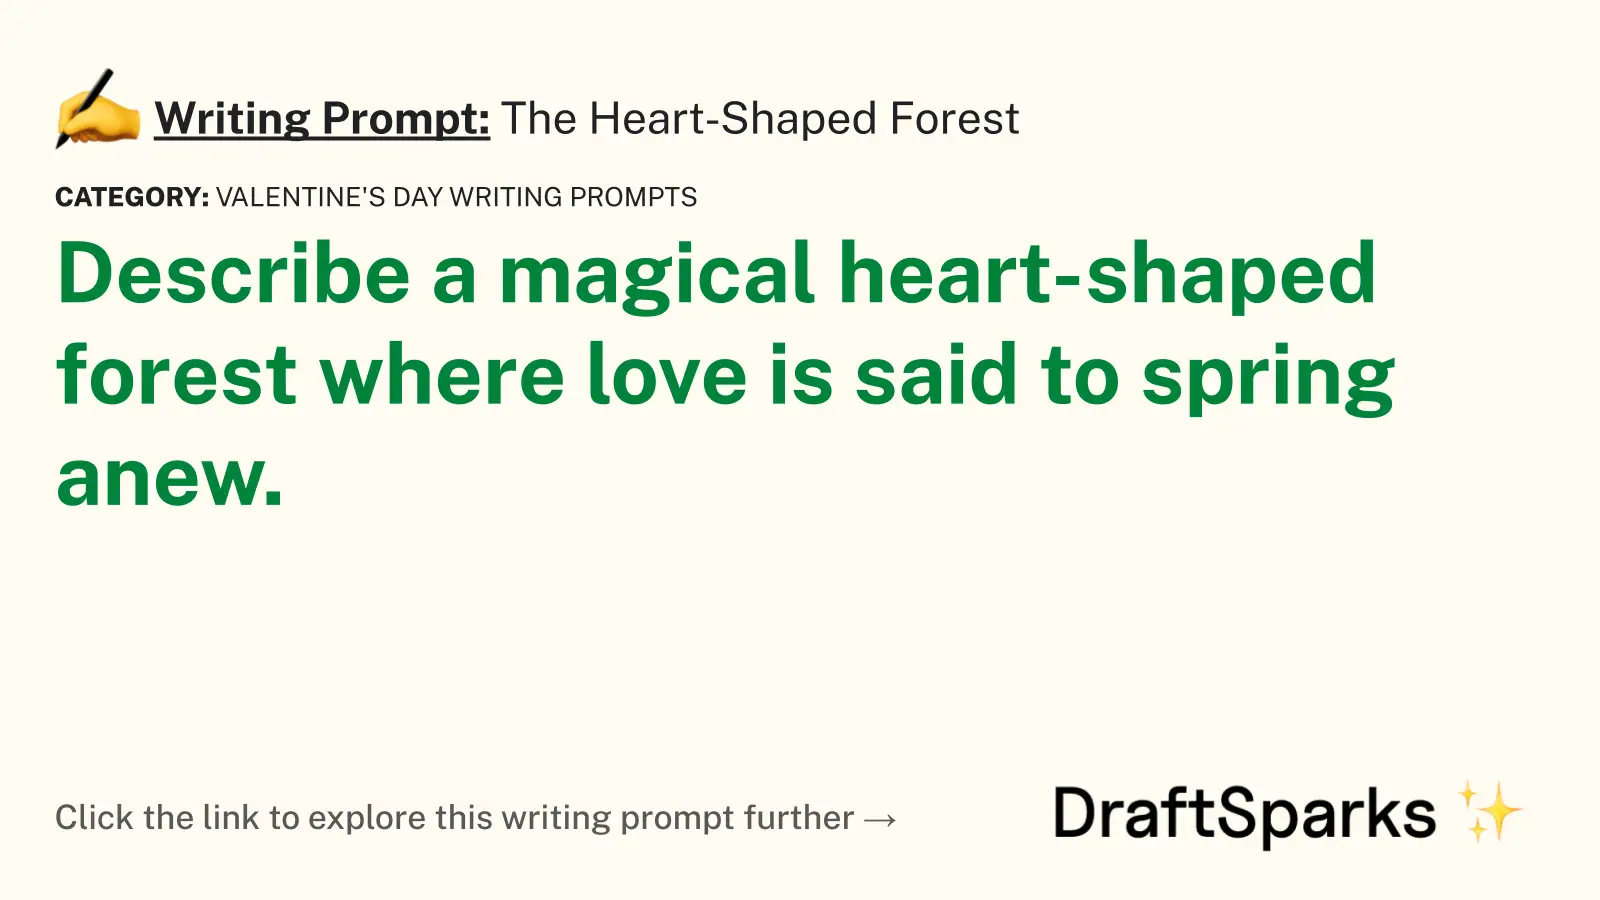 The Heart-Shaped Forest